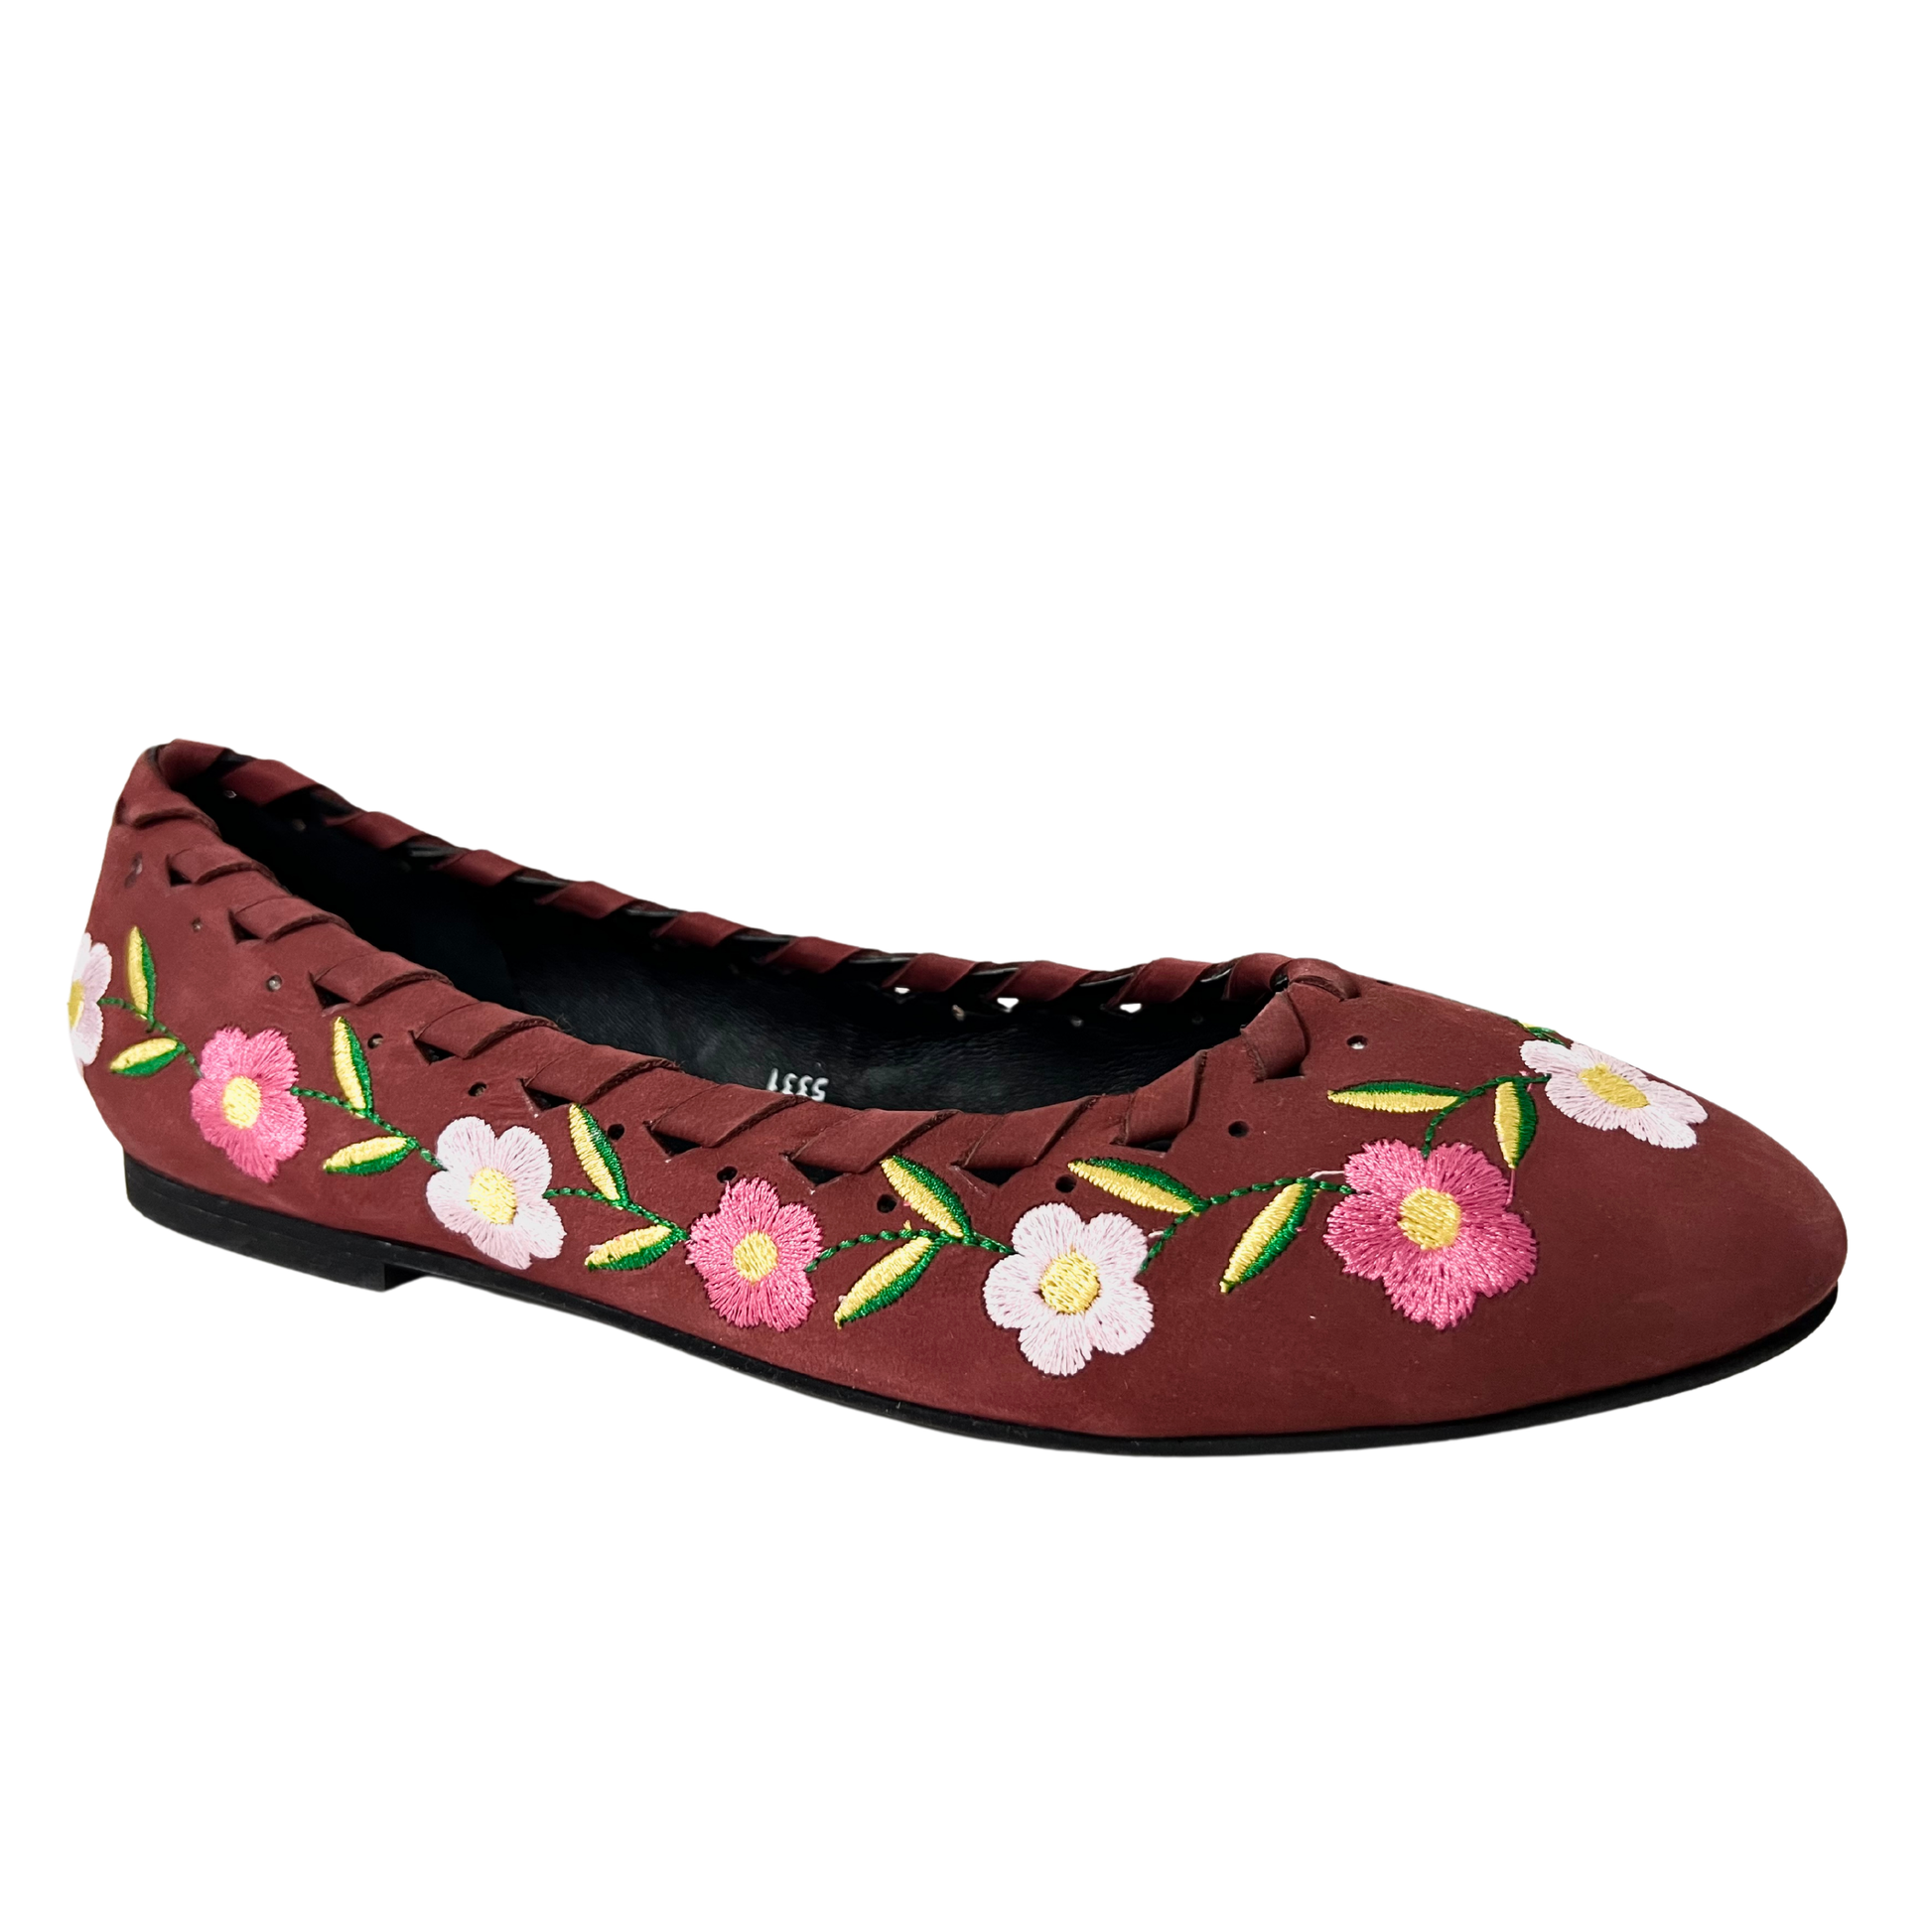 burgundy color flower embroidered leather ballerina for ladies